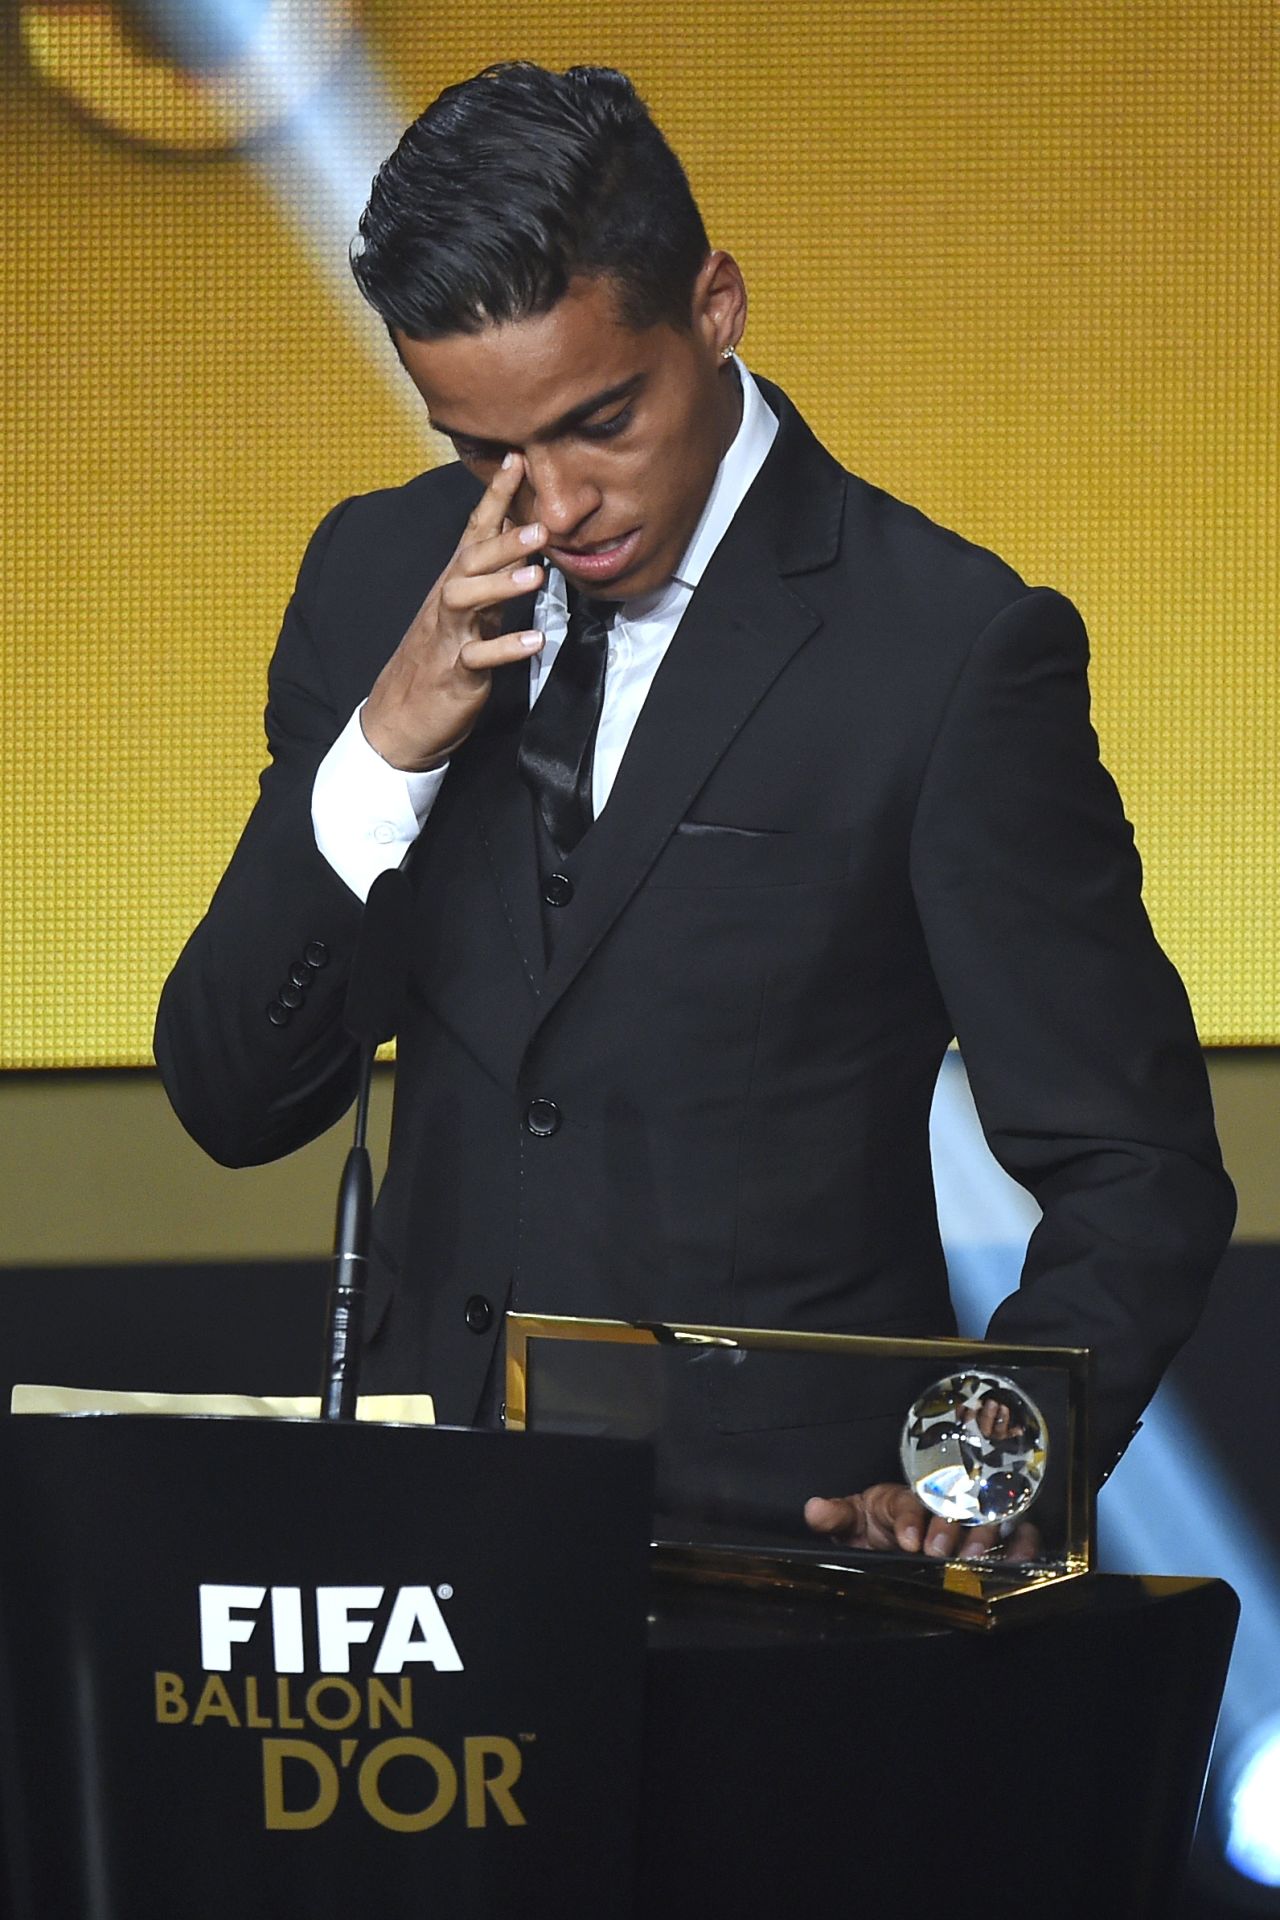 As an emotional Lloyd would do later in the evening, Brazilian striker Wendell Lira broke down in tears after winning the Puskas Award for best goal of the year. His acrobatic overhead kick beat efforts by Messi and Roma's Alessandro Florenzi.